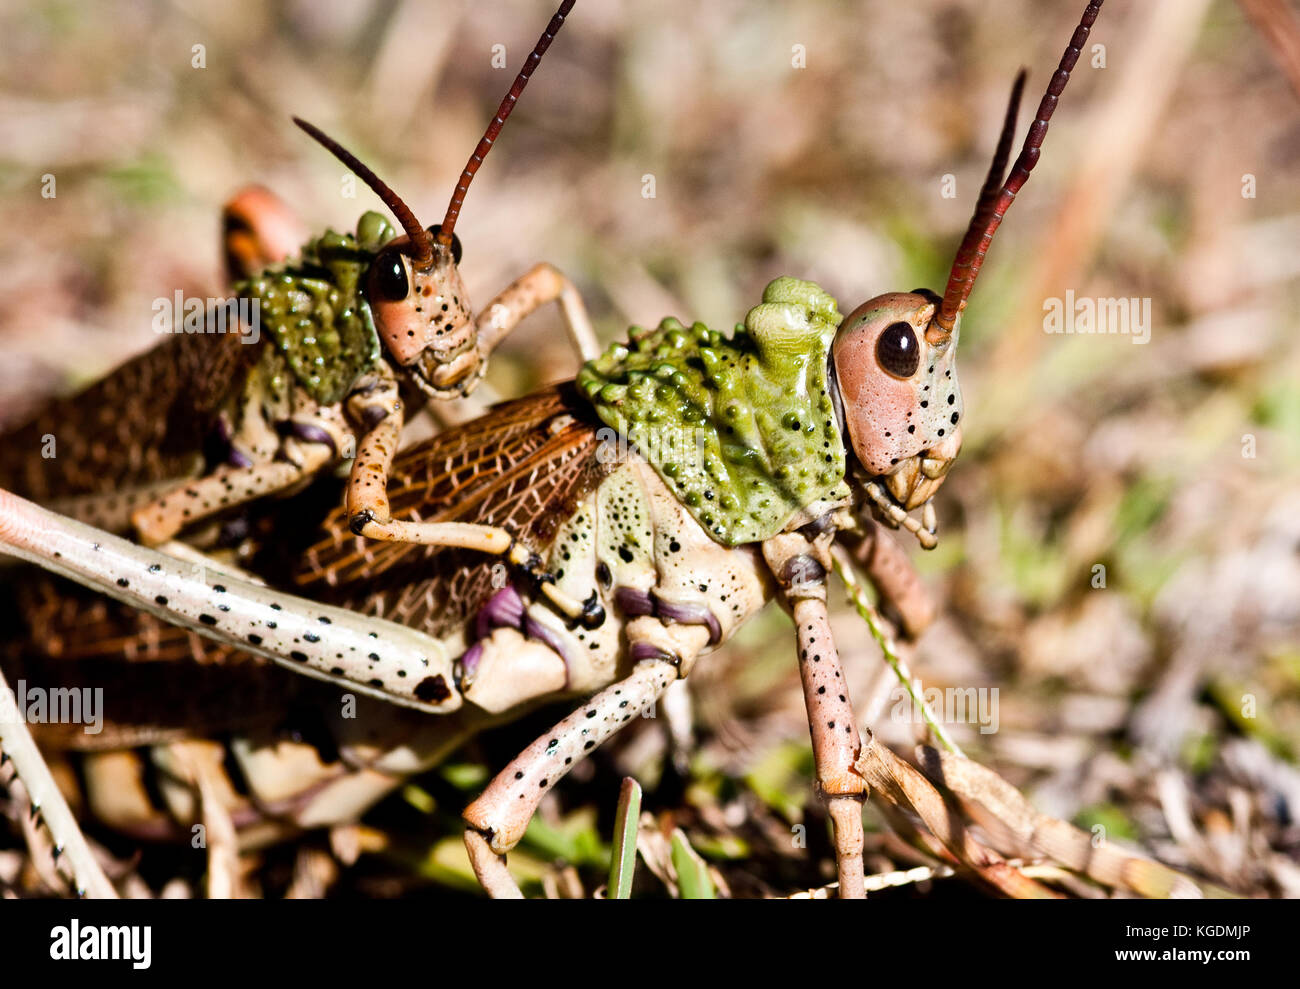 Pyrgomorphid Grasshopper also known as the Gaudy Grasshopper. This image was taken in South Africa. Stock Photo